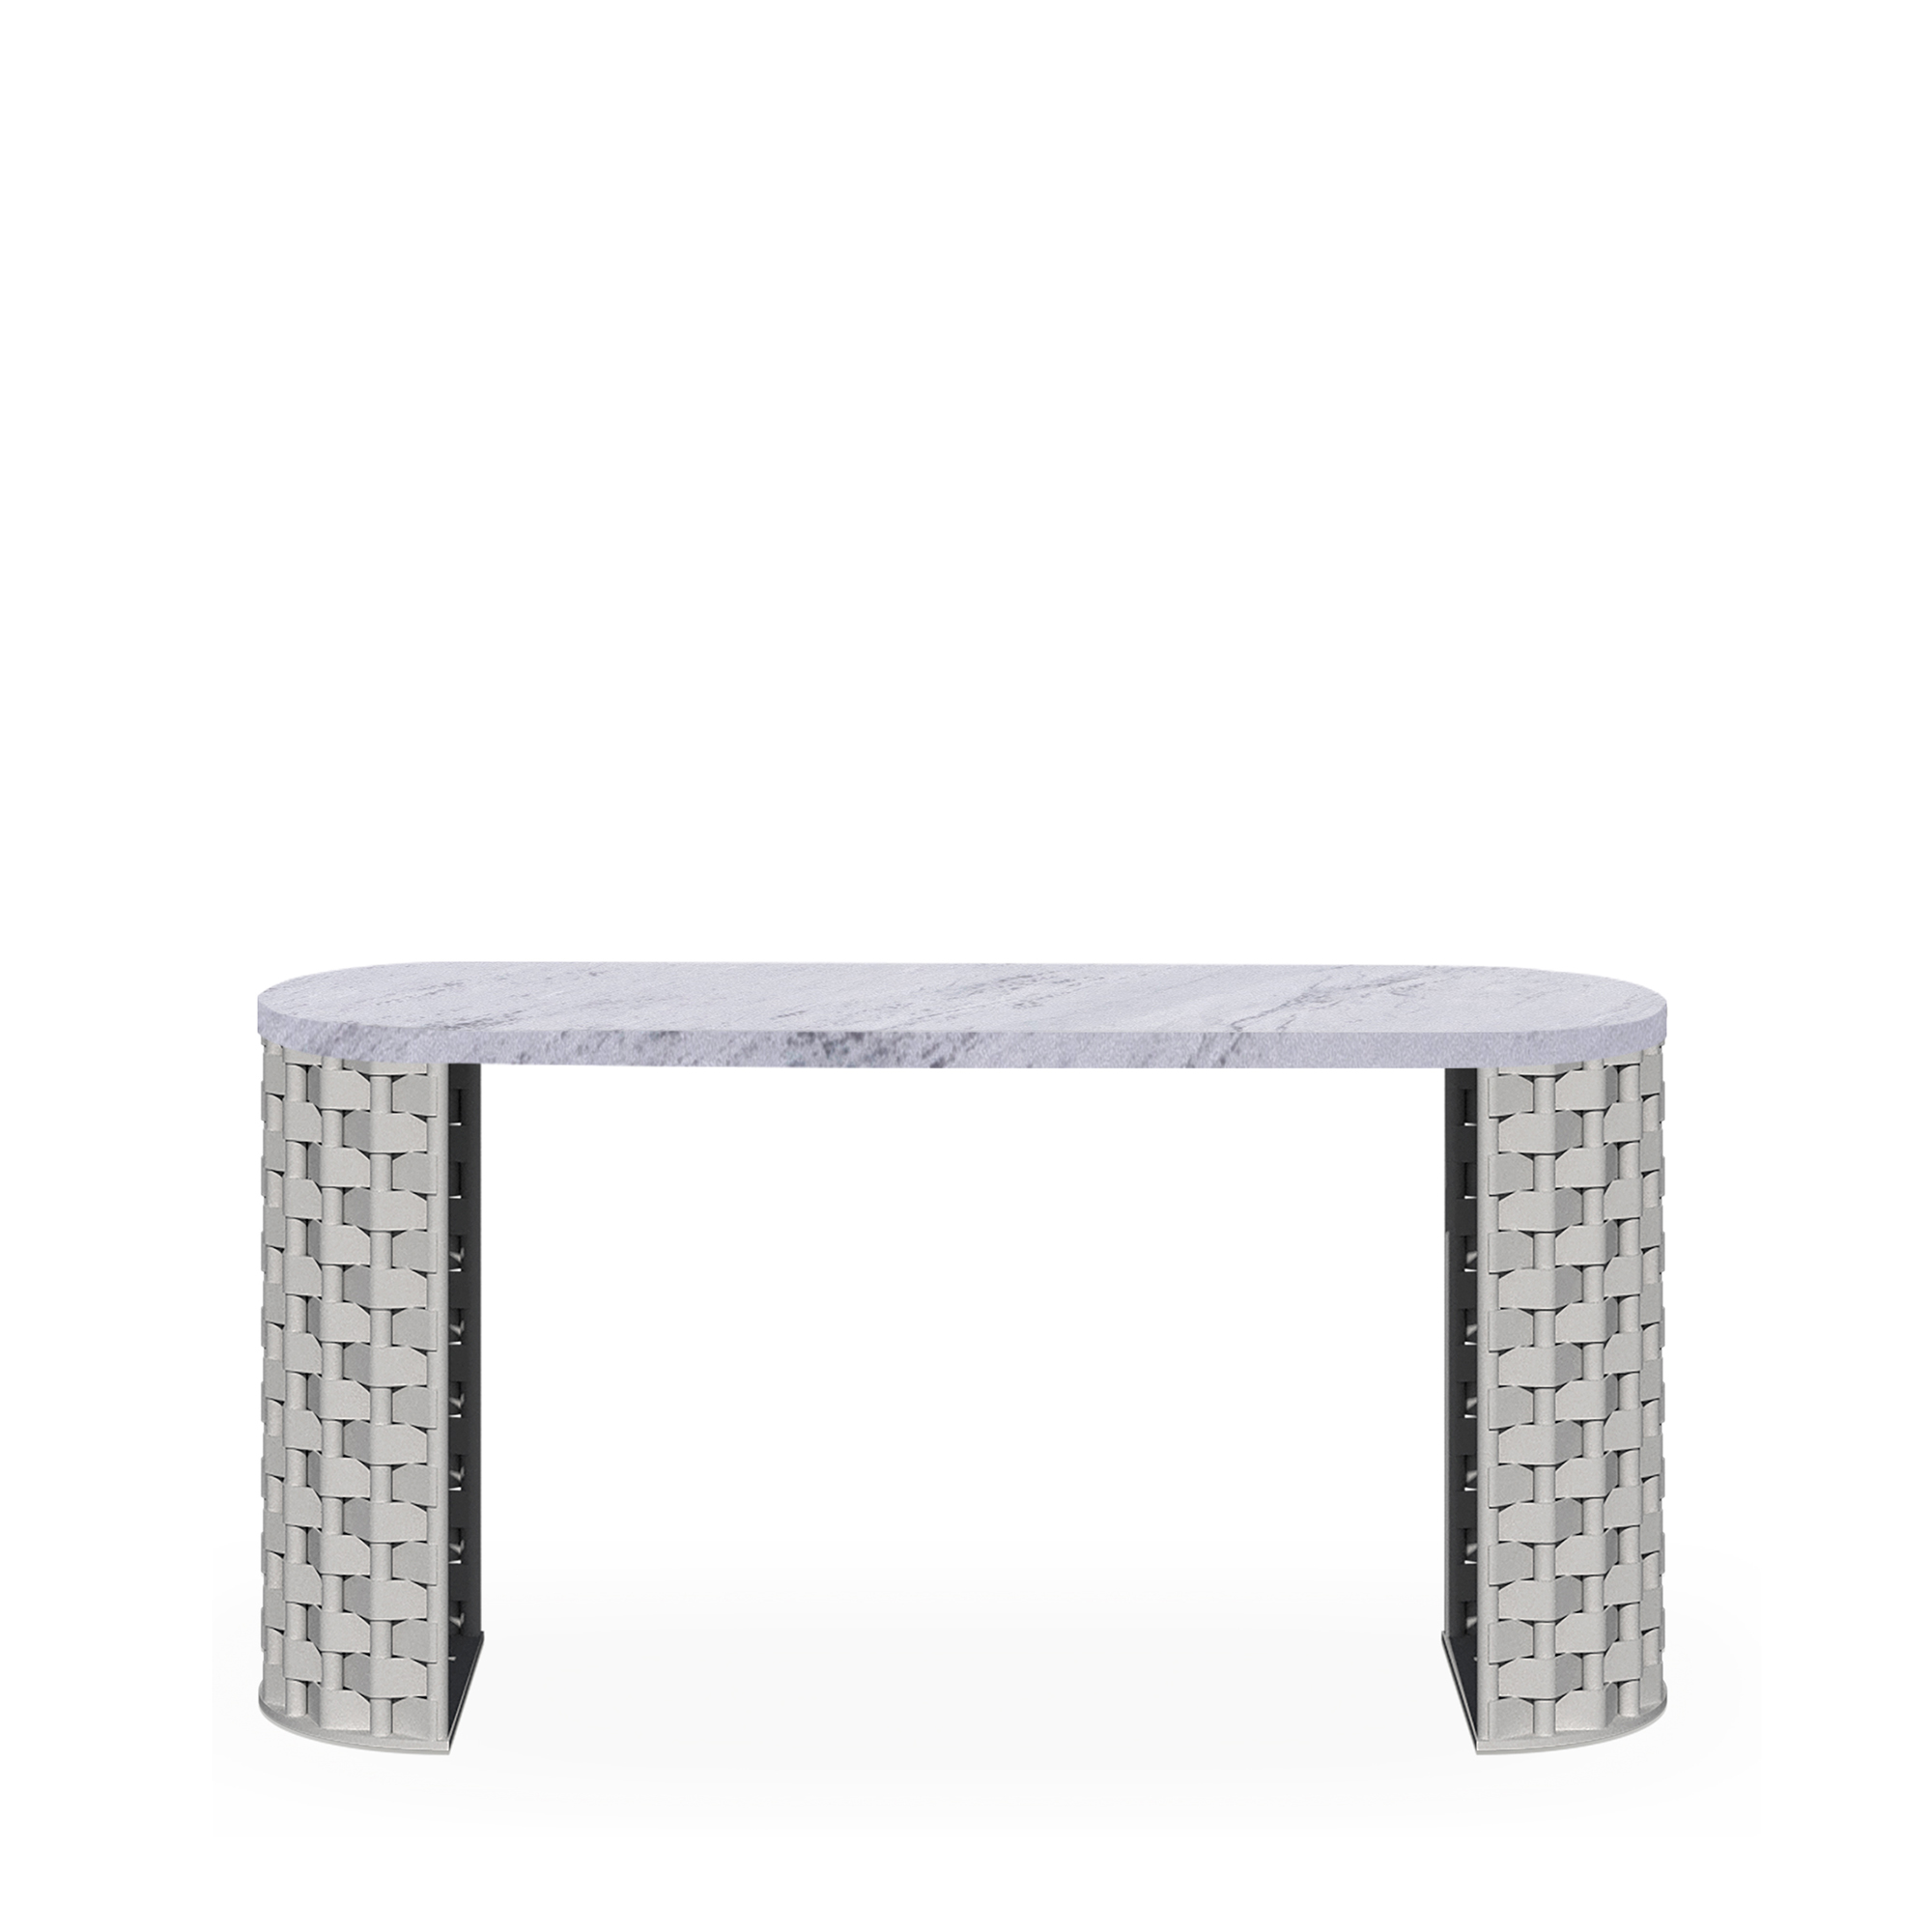 Bertrand W | Art Series | Decasa Marble Marble Dining Table